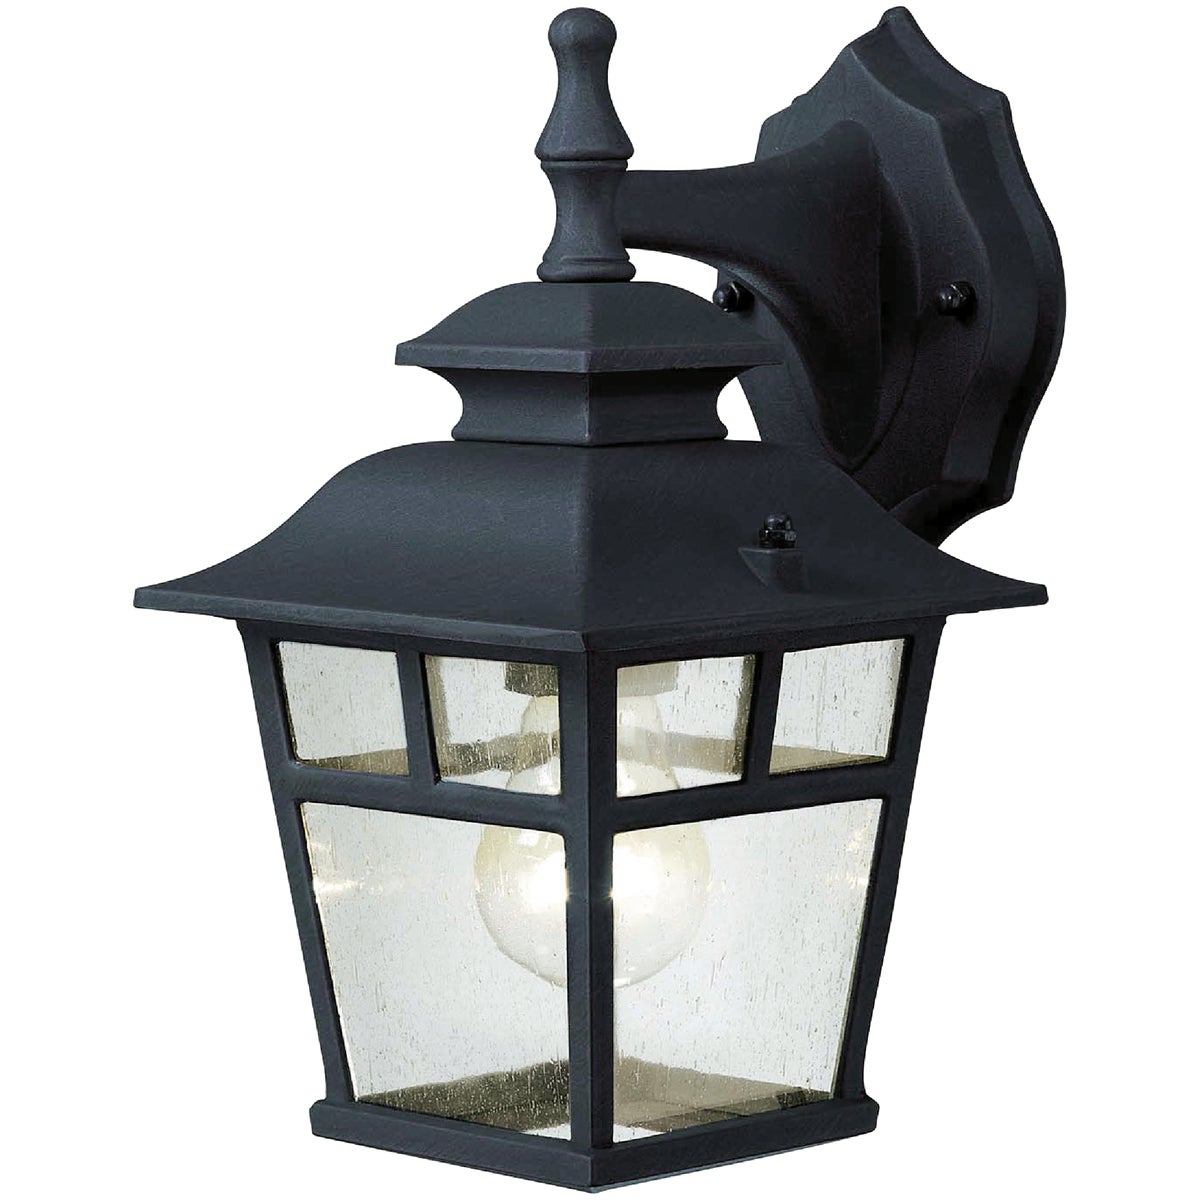 Item 500385, Outdoor wall-mounted light fixture ideal for illuminating the outside of 